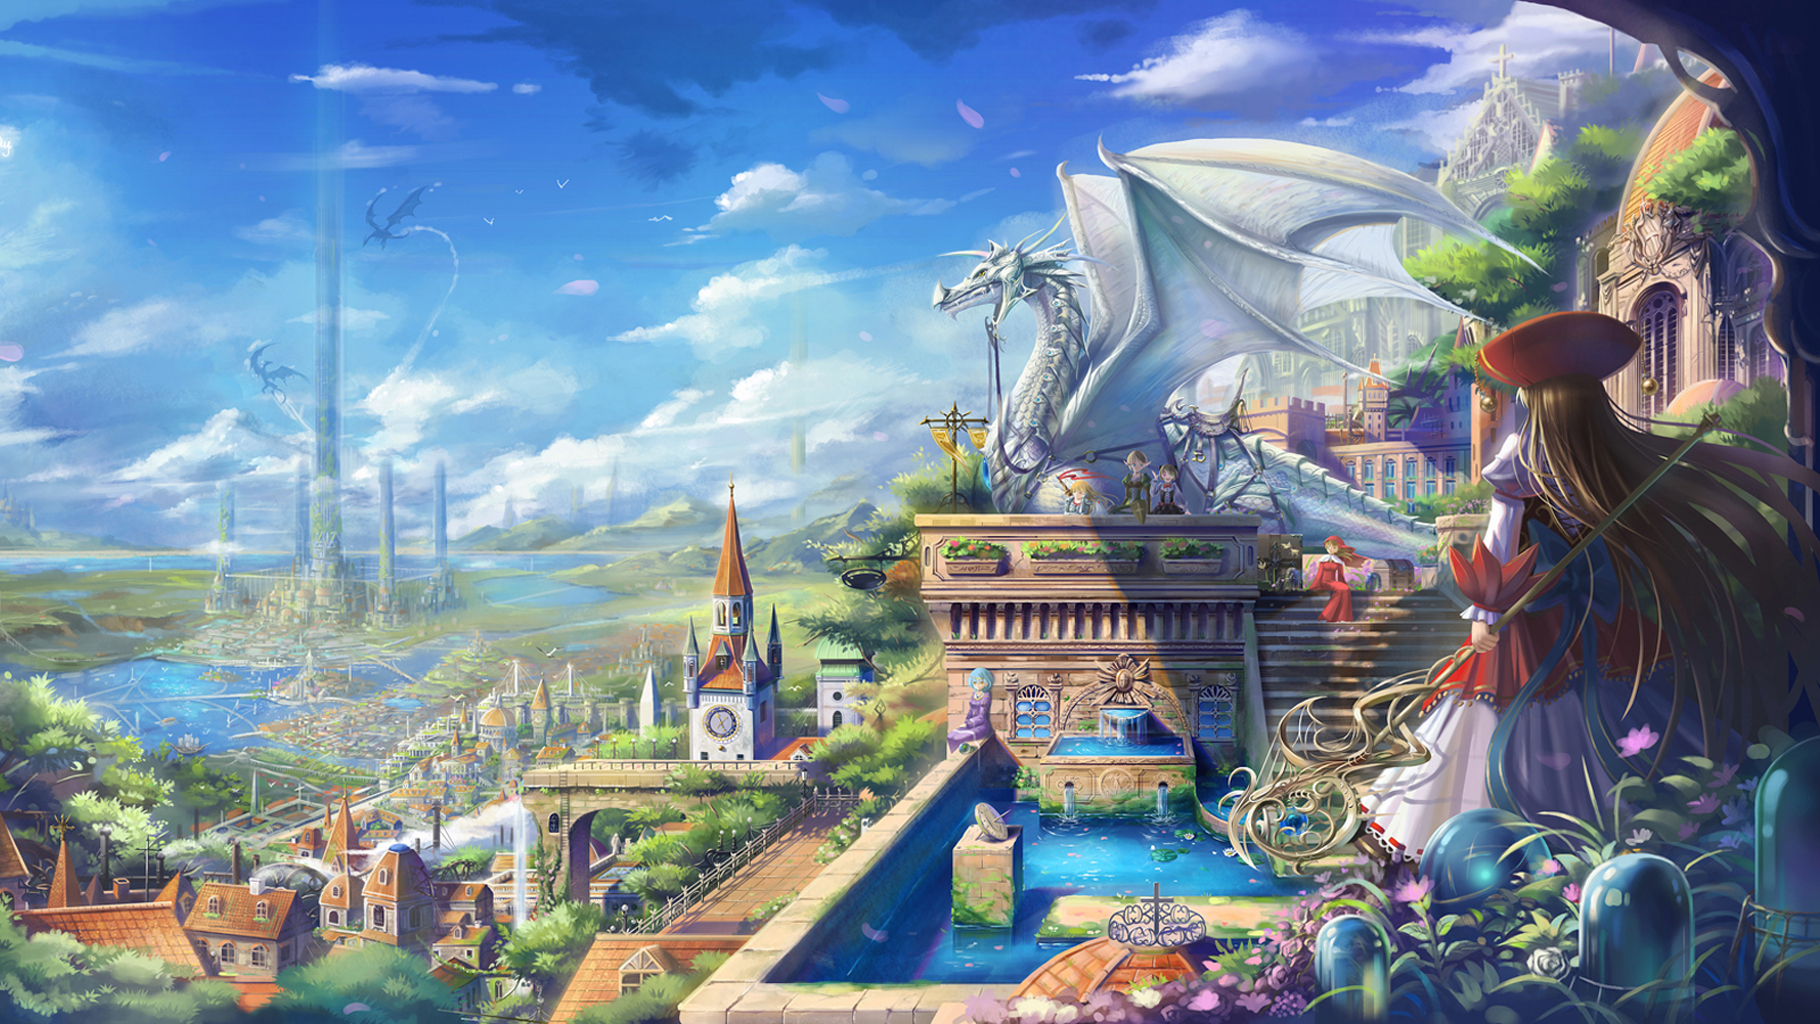 dragon city wallpaper,strategy video game,adventure game,games,action adventure game,cg artwork